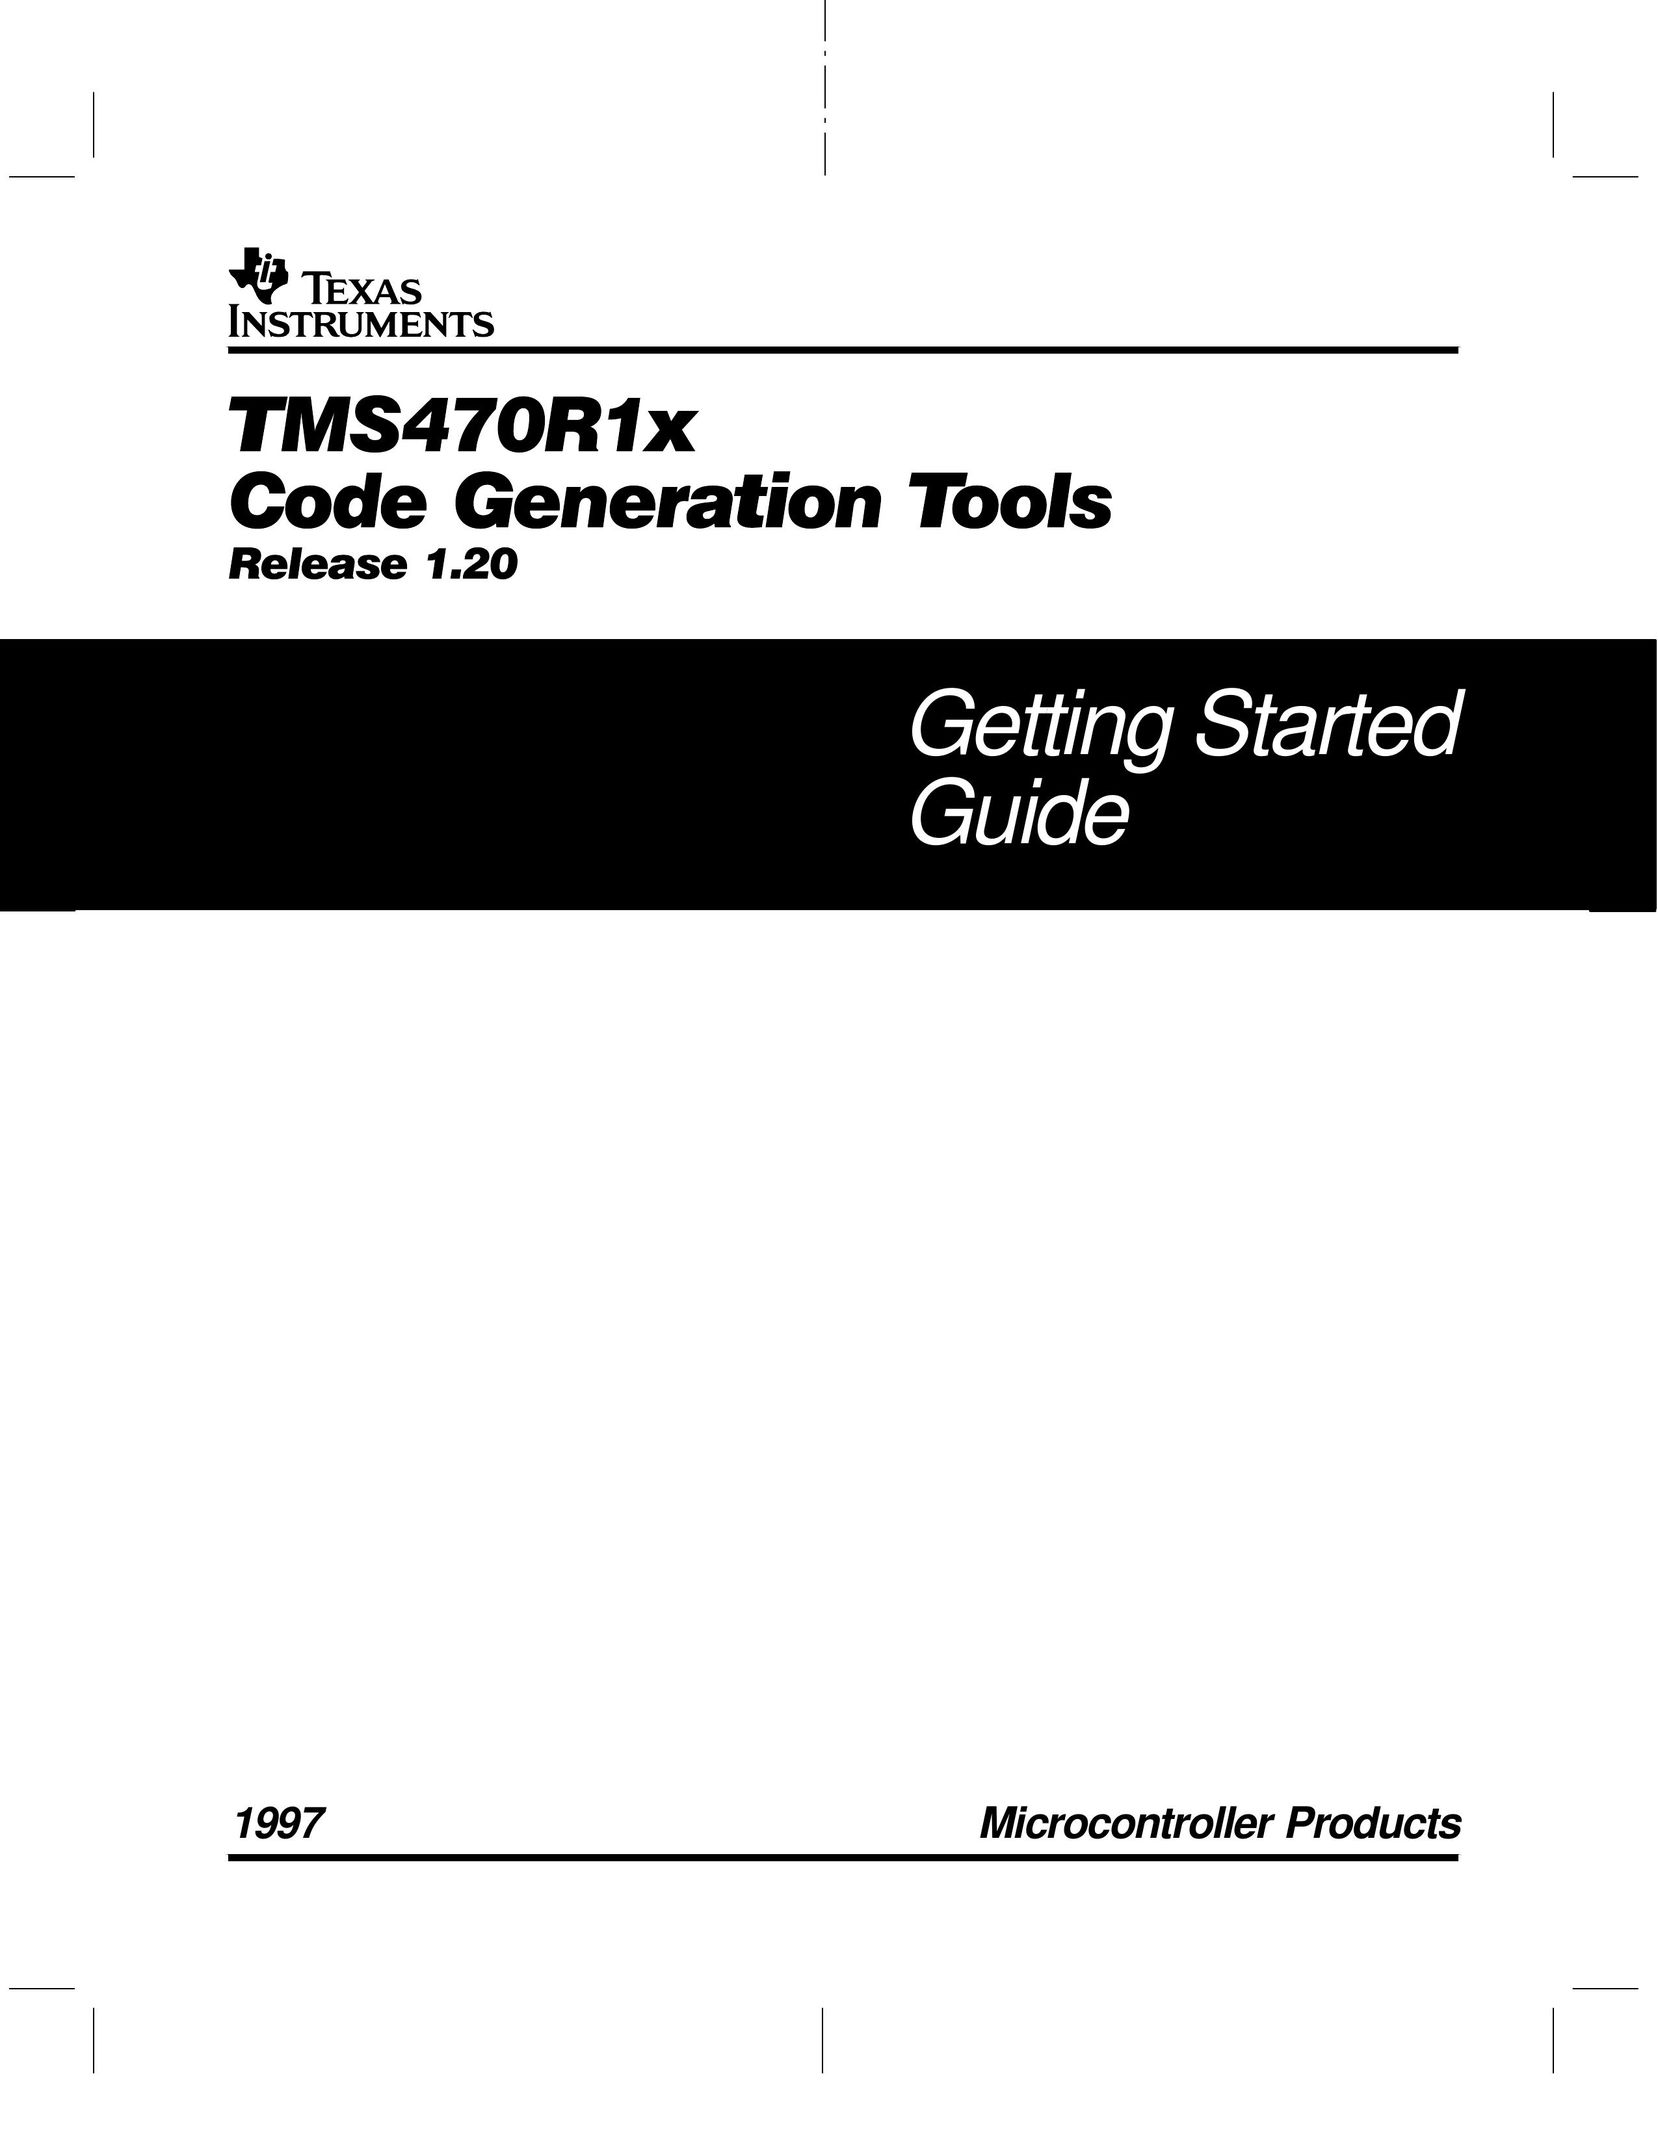 Texas Instruments TMS470R1x Barcode Reader User Manual